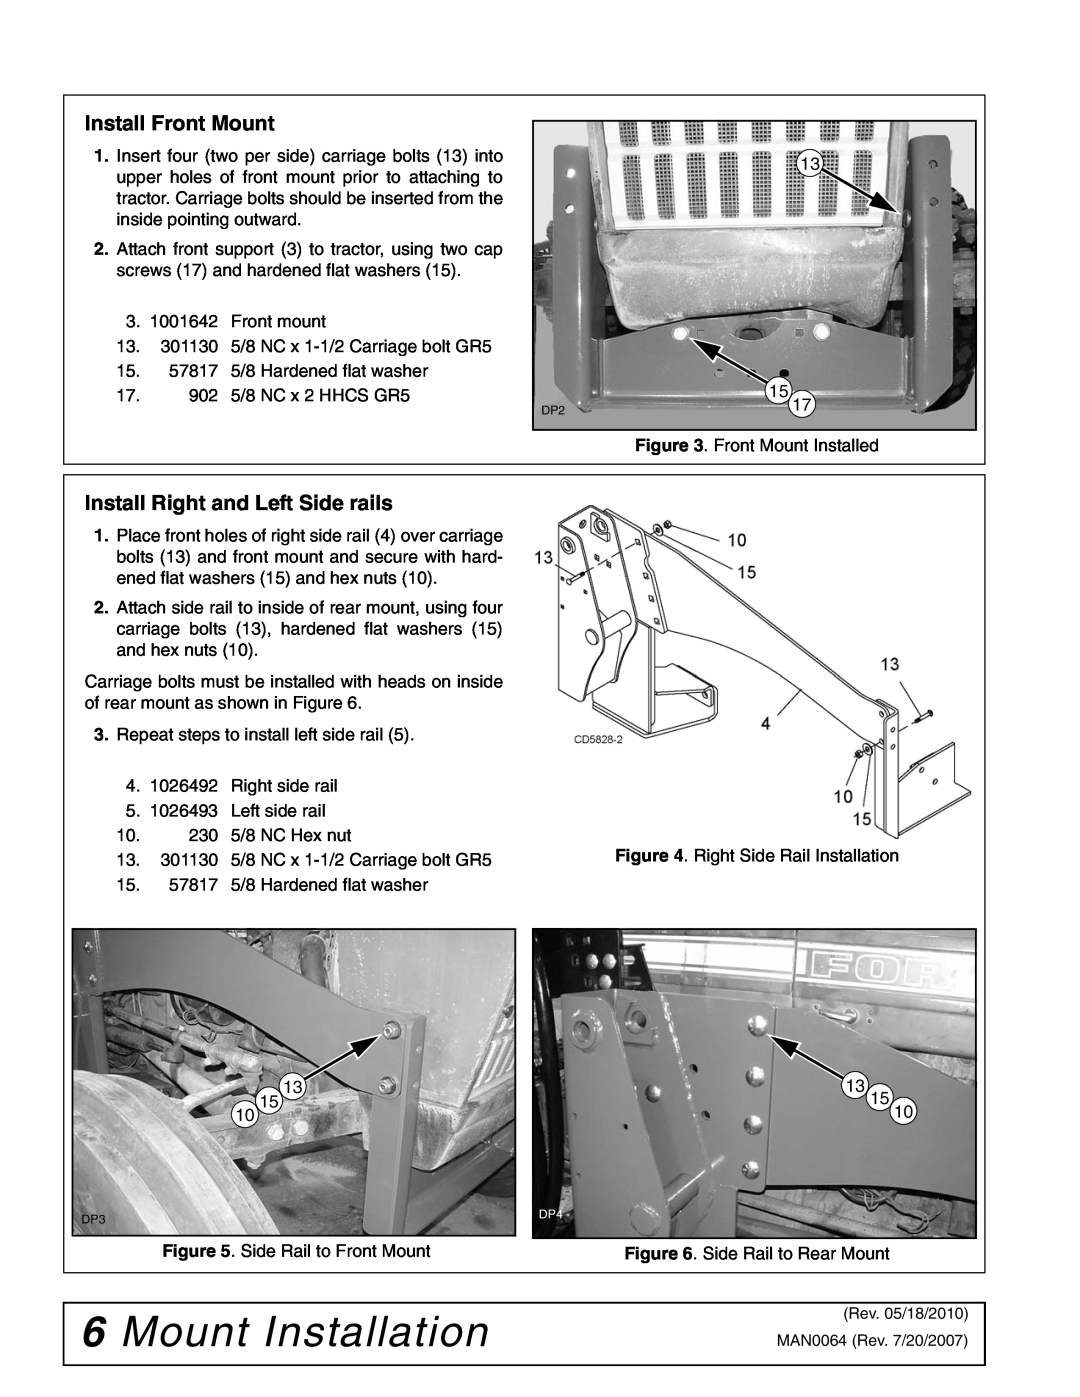 Woods Equipment 111877 manual Mount Installation, Install Front Mount, Install Right and Left Side rails 